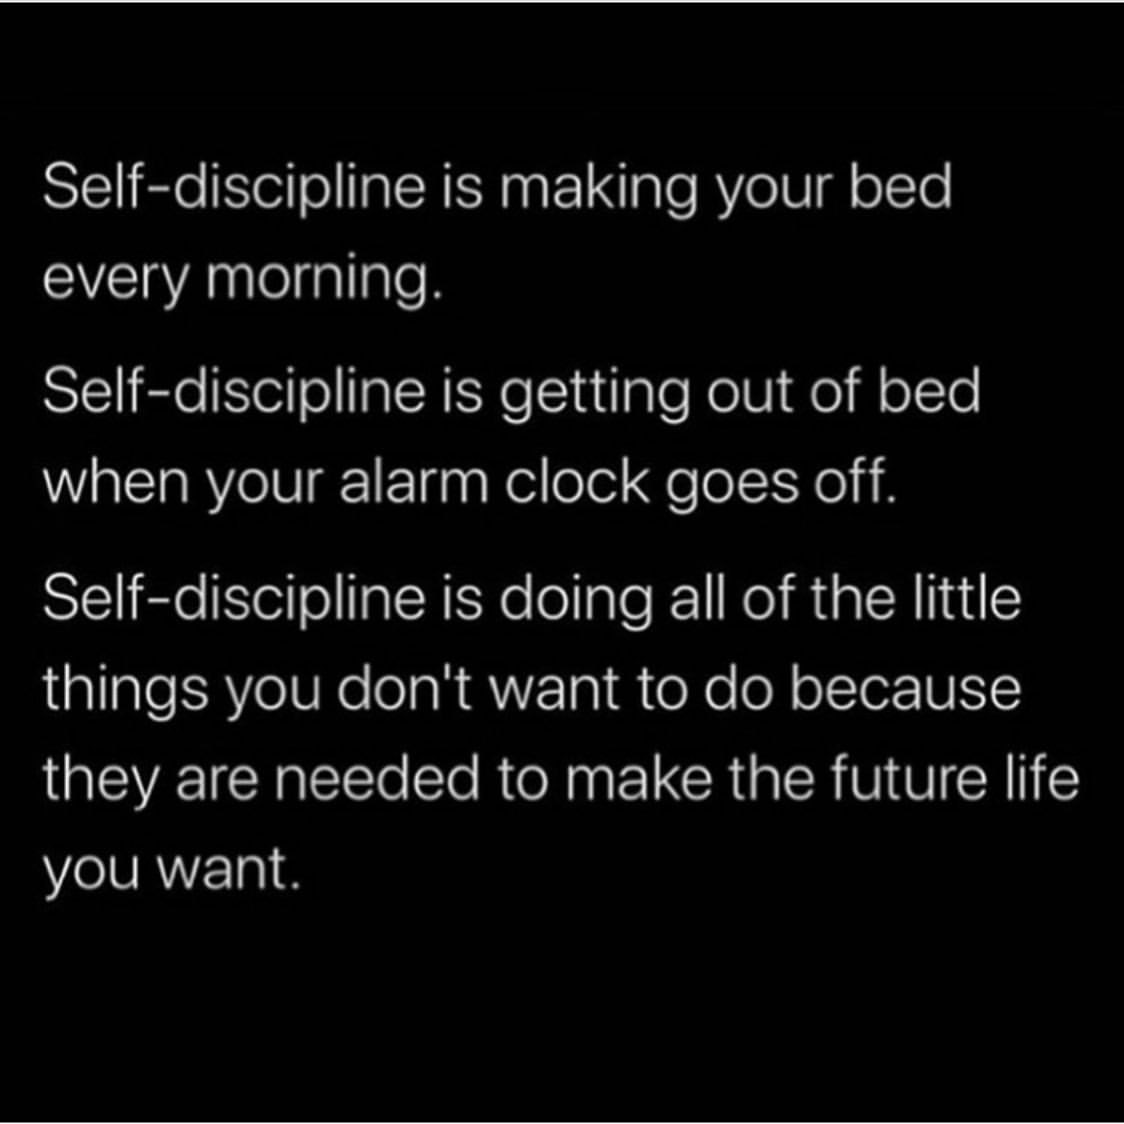 Self-discipline is making your bed every morning. Self-discipline is getting out of bed when your alarm clock goes off. Self-discipline is doing all of the little things you don't want to do because they are needed to make the future life you want.